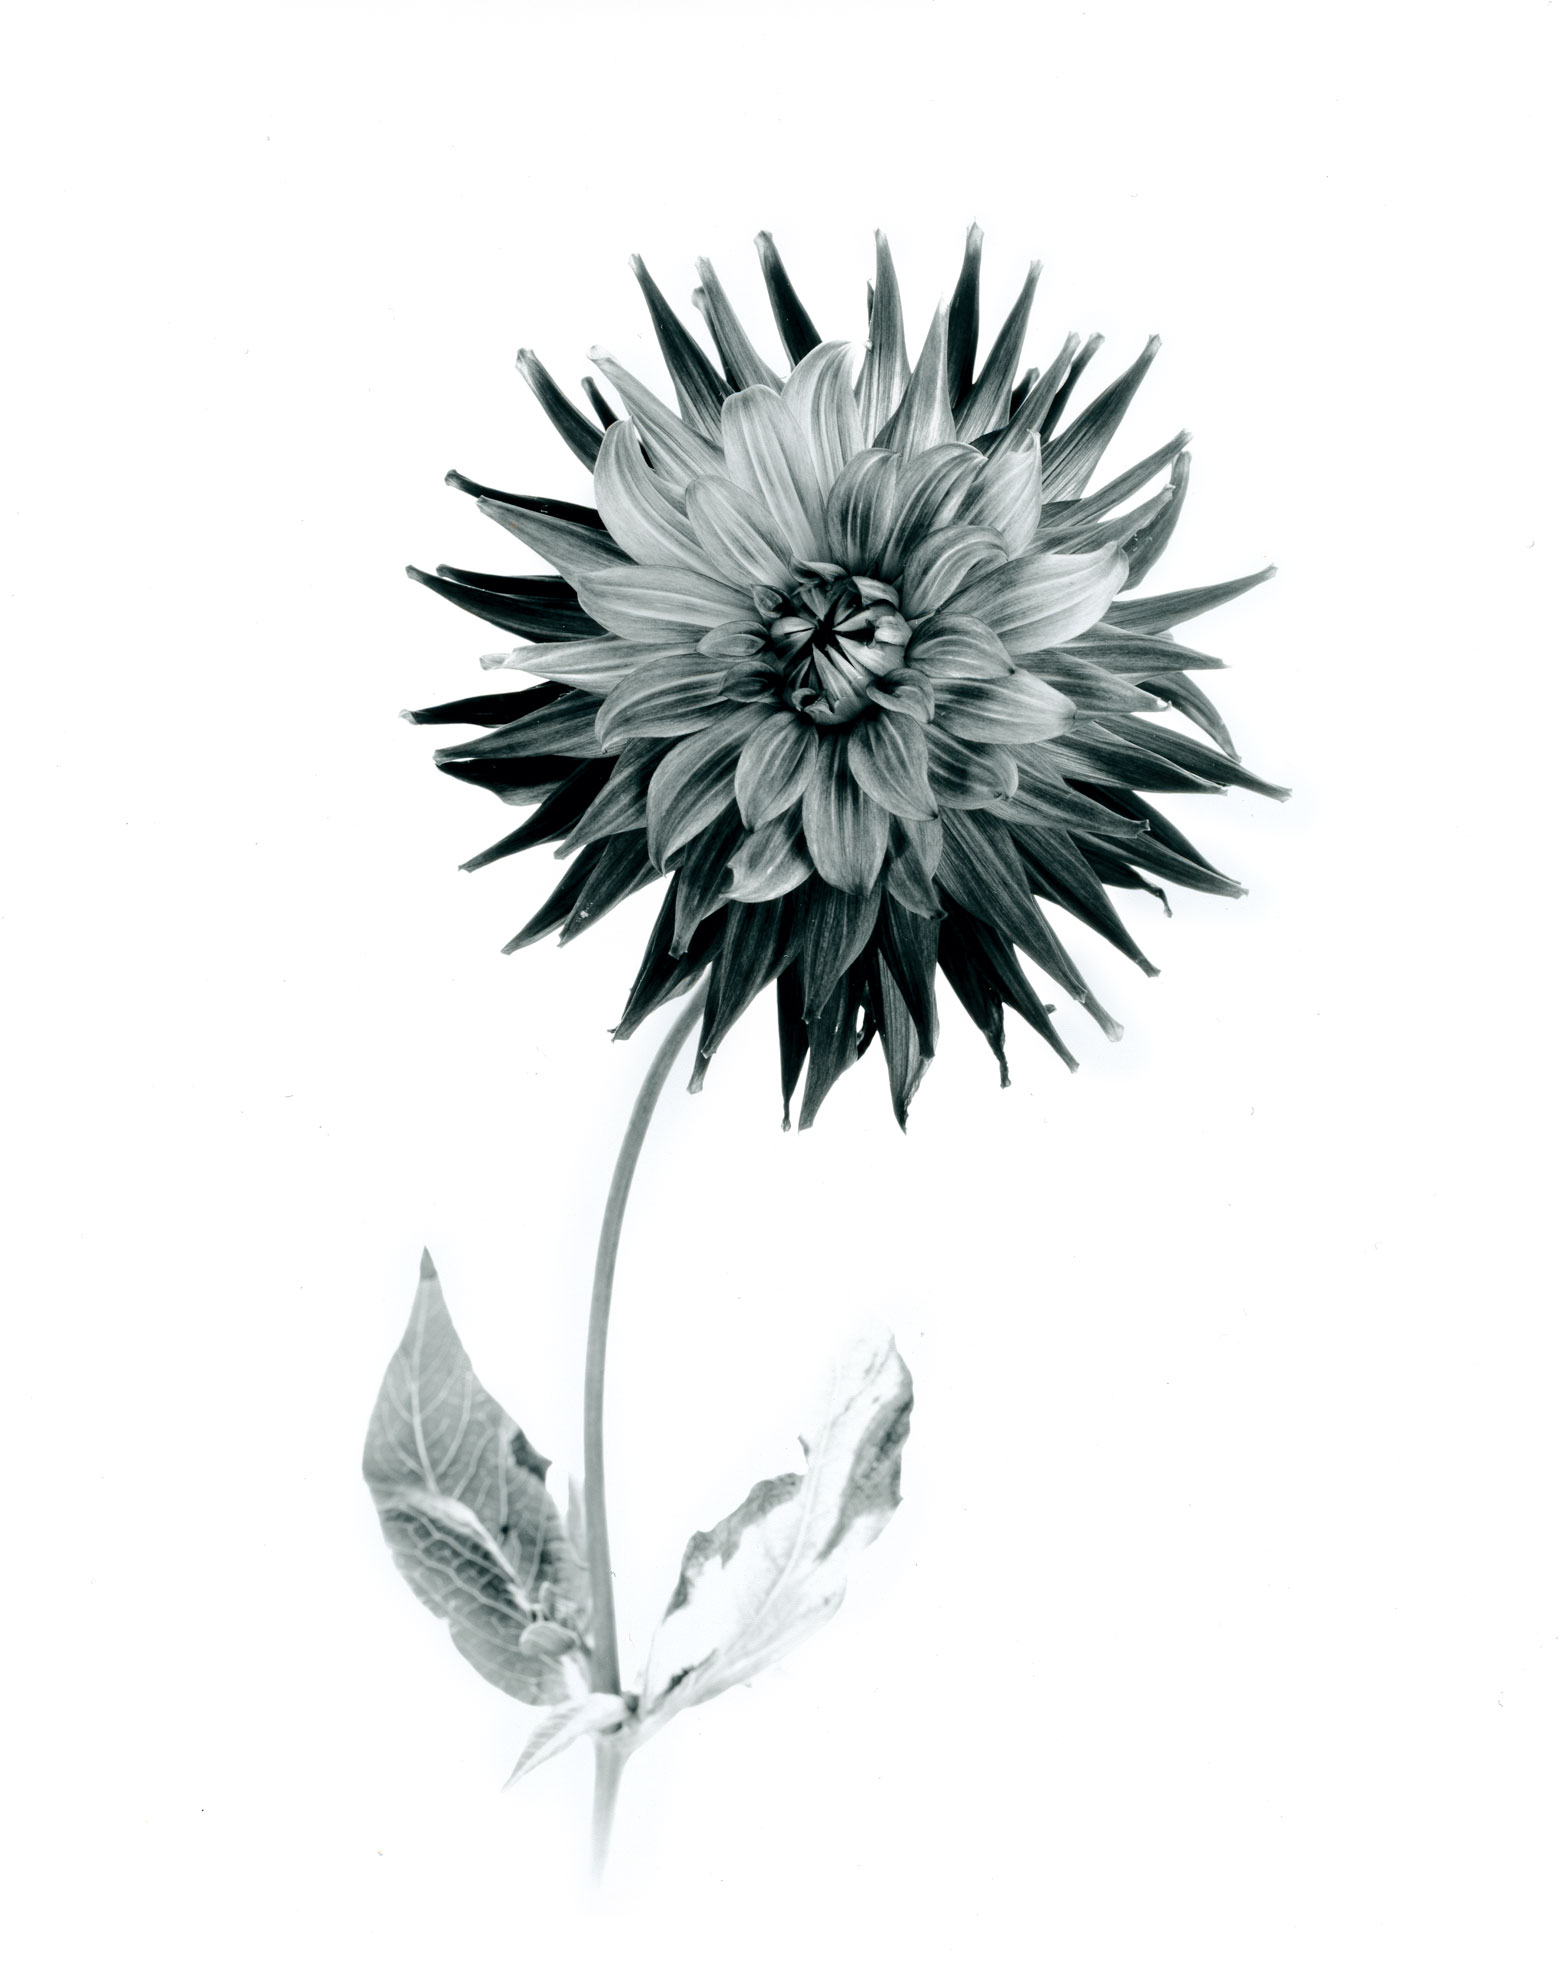 Black and white flower photography